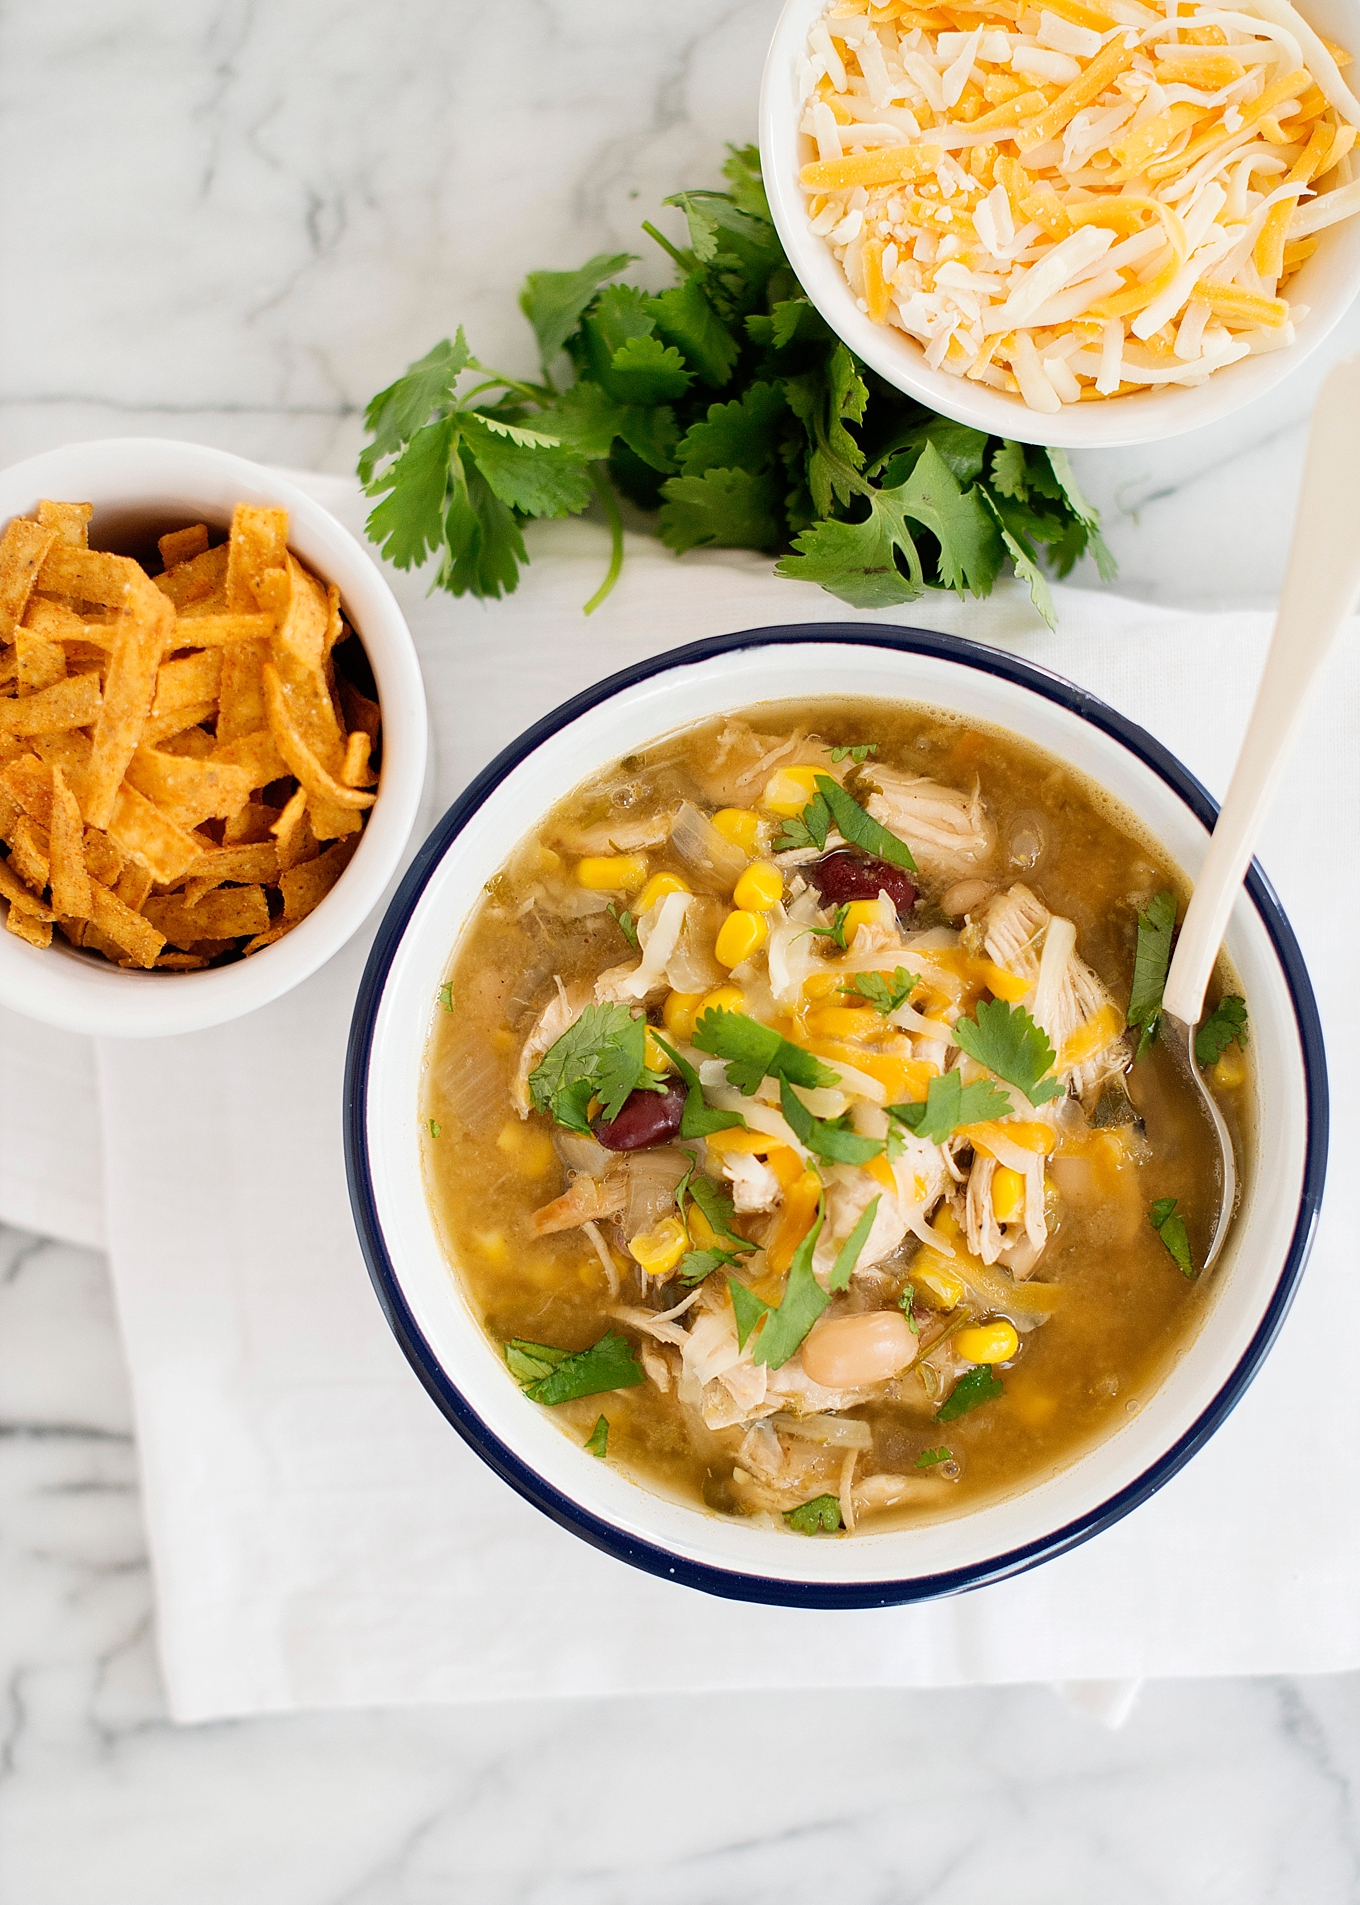 This Green Chicken Chili a go-to soup recipe. Throw everything in your Instant Pot and you have a delicious, healthy dinner on the table in 30 minutes.